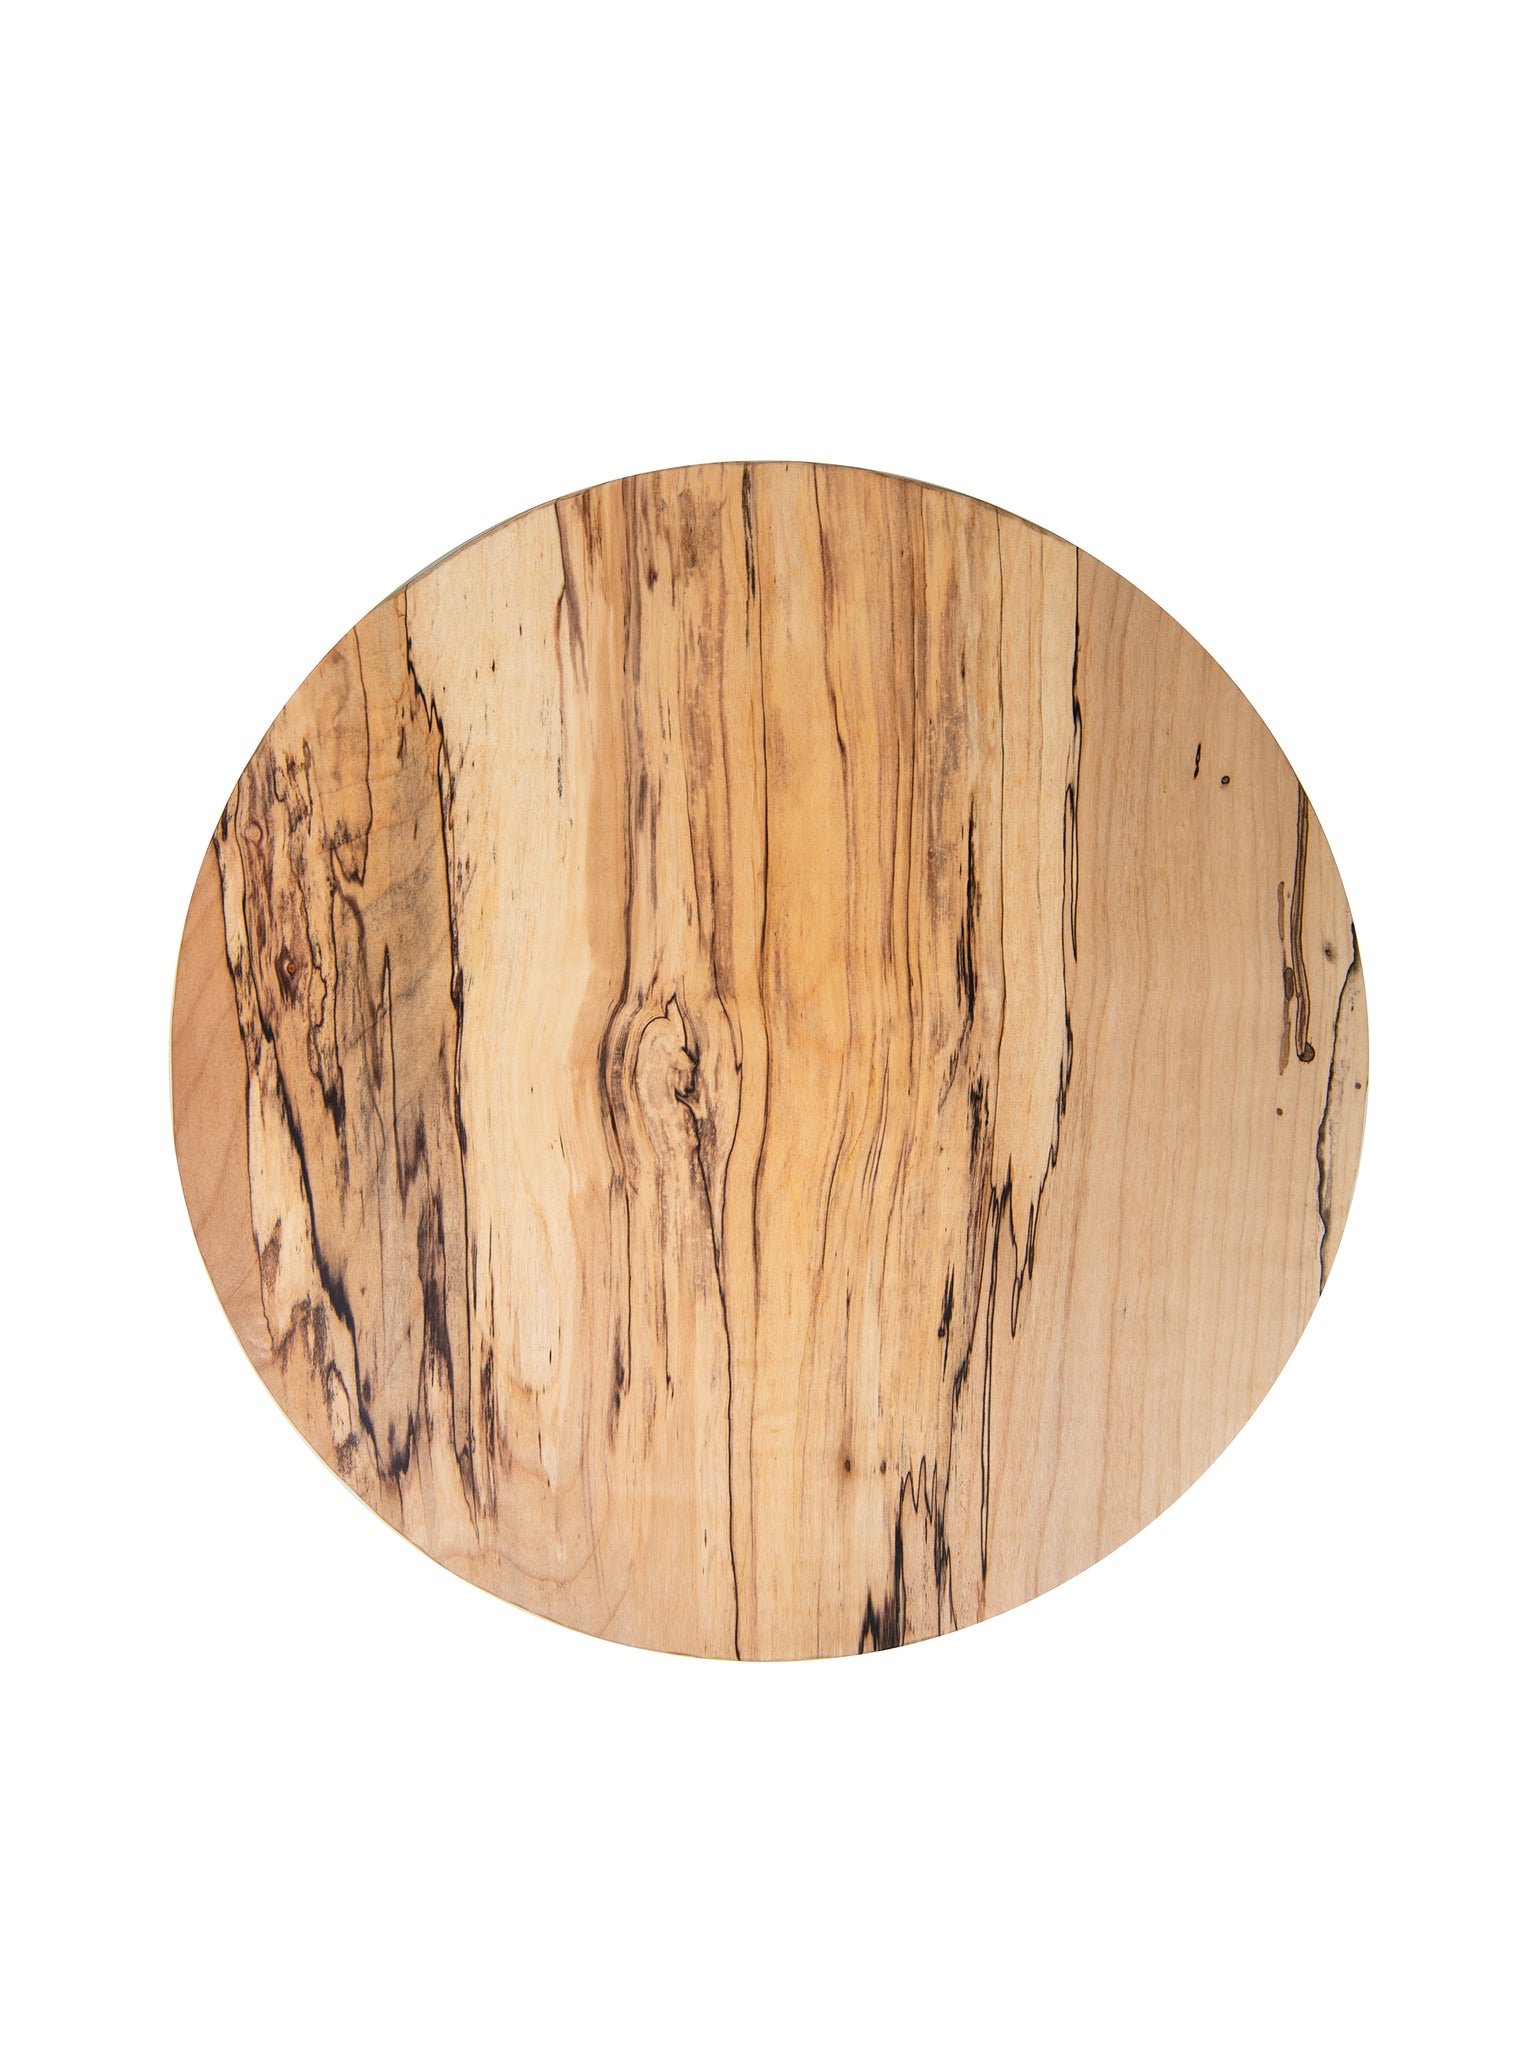 Spencer Peterman Spalted Maple Lazy Susan 20 Inch Weston Table